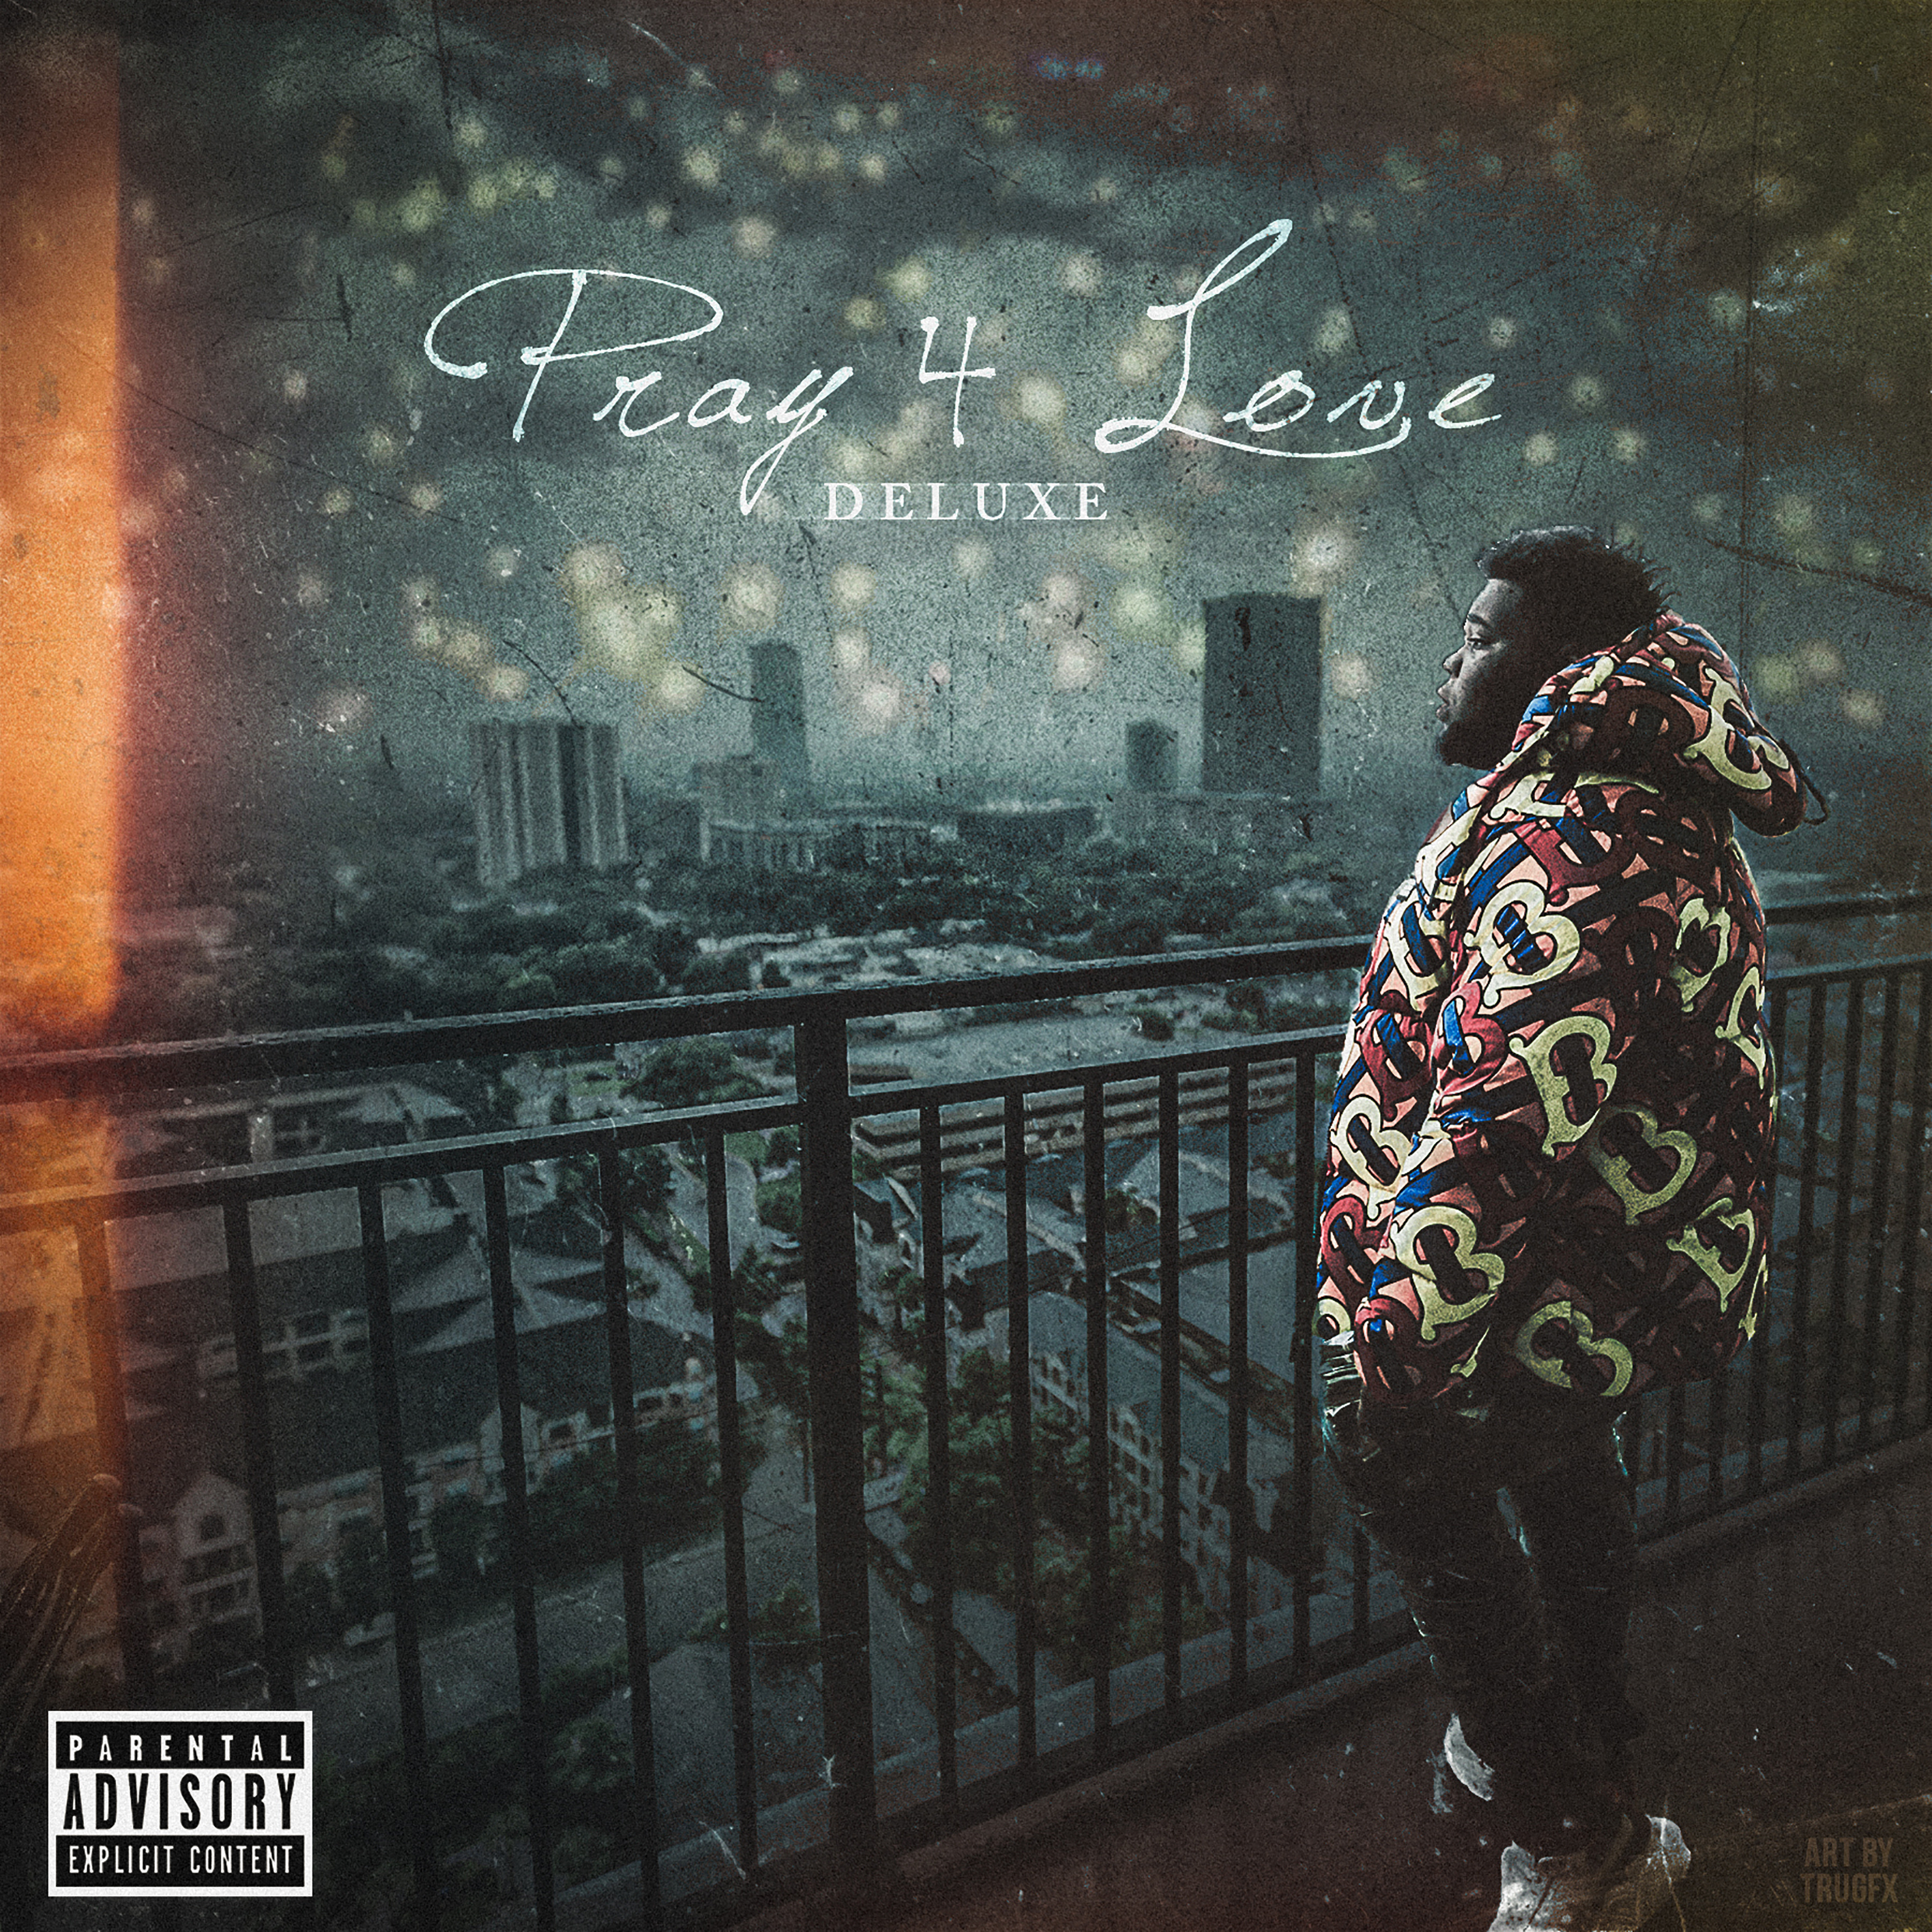 Rod Wave Releases “Pray 4 Love” Deluxe With Lil Baby & Yo Gotti